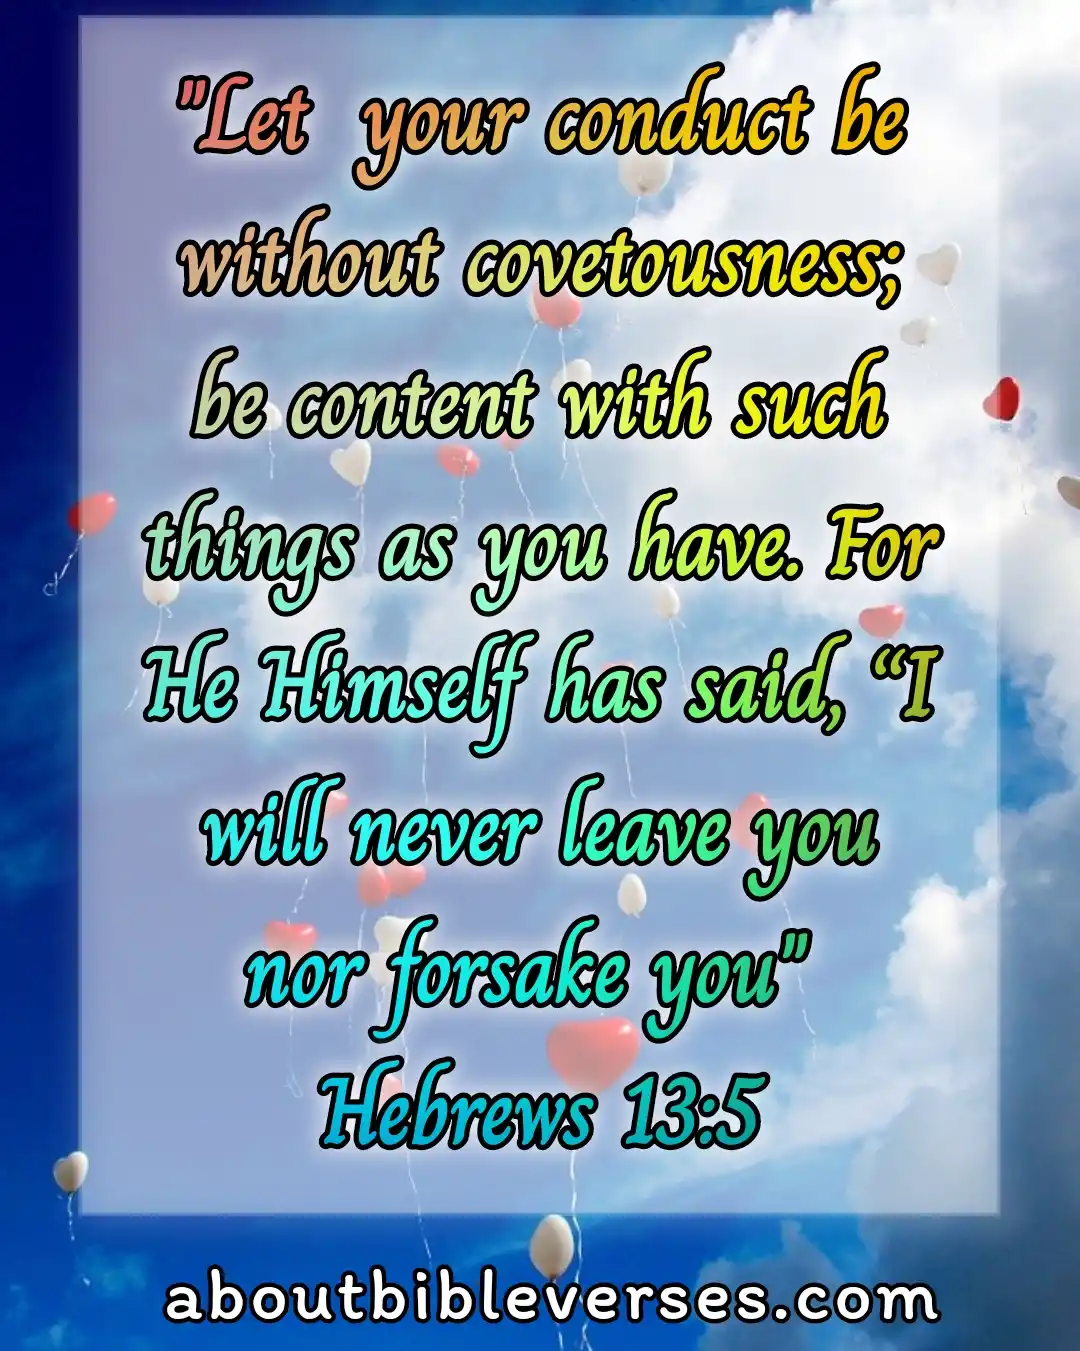 god will take care of you bible verses (Hebrews 13:5)